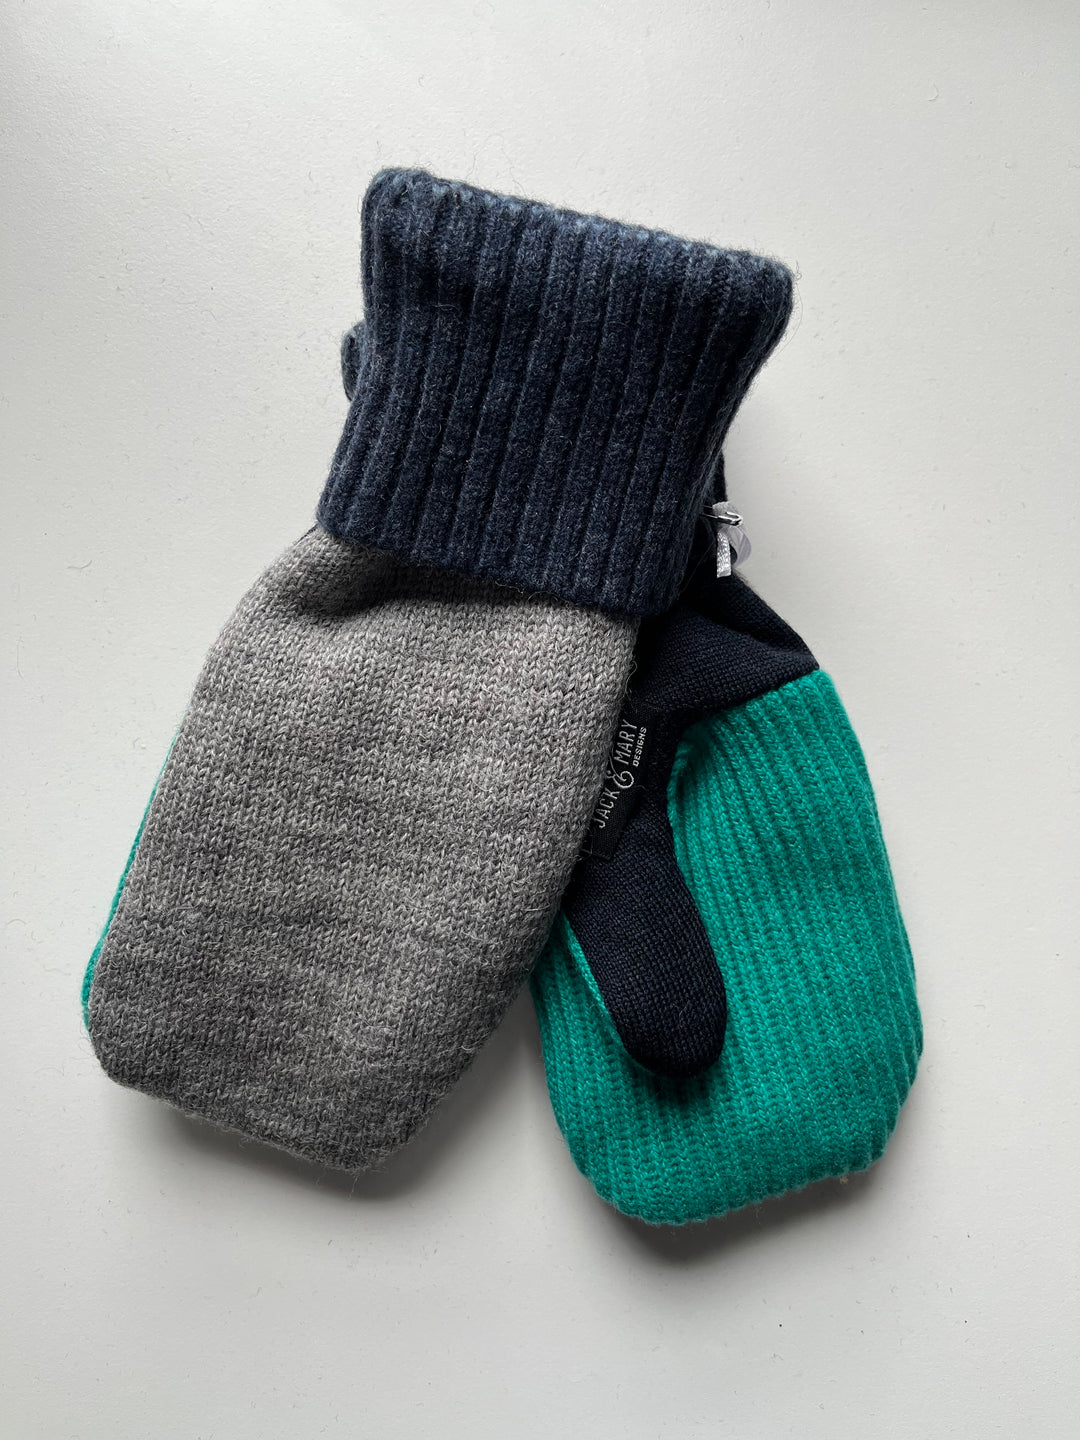 Blue, grey, and green mittens